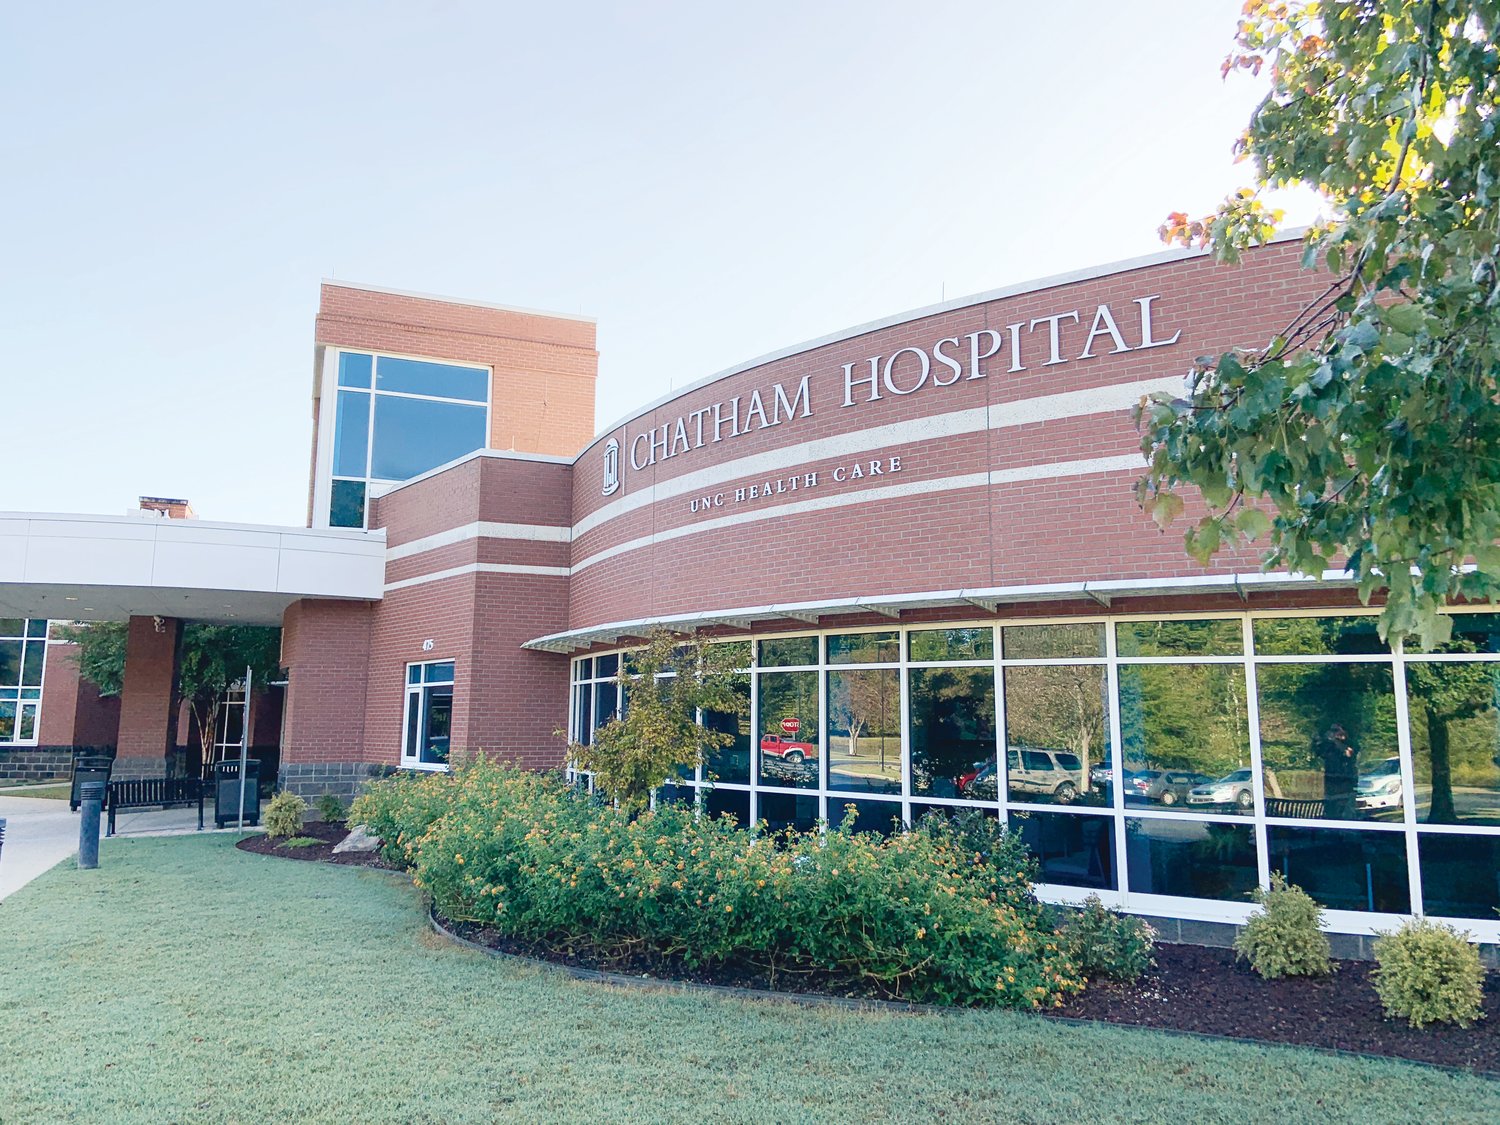 Chatham Hospital in Siler City is planning to restart maternity care, including births, in September 2020. The hospital stopped its previous maternity program more than 20 years ago.